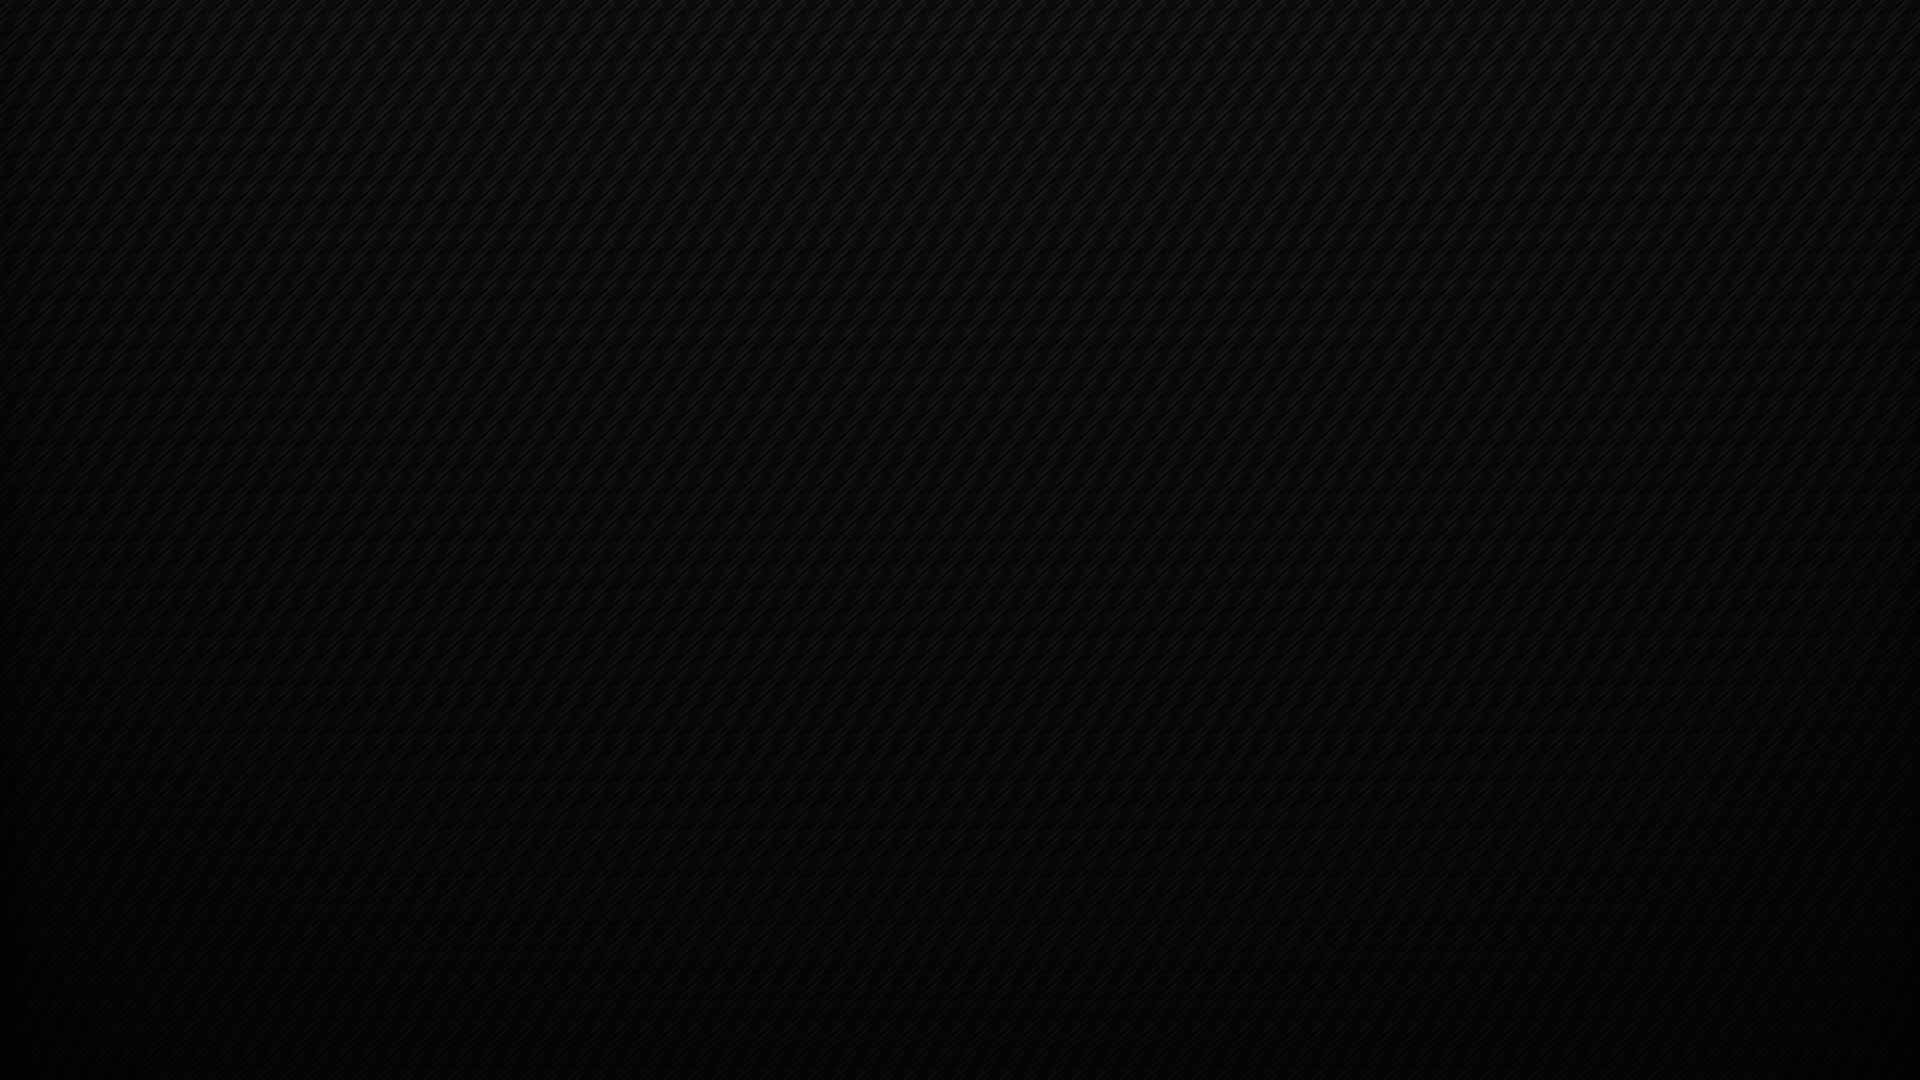 Plain Black Wallpapers and Backgrounds [Full HD]